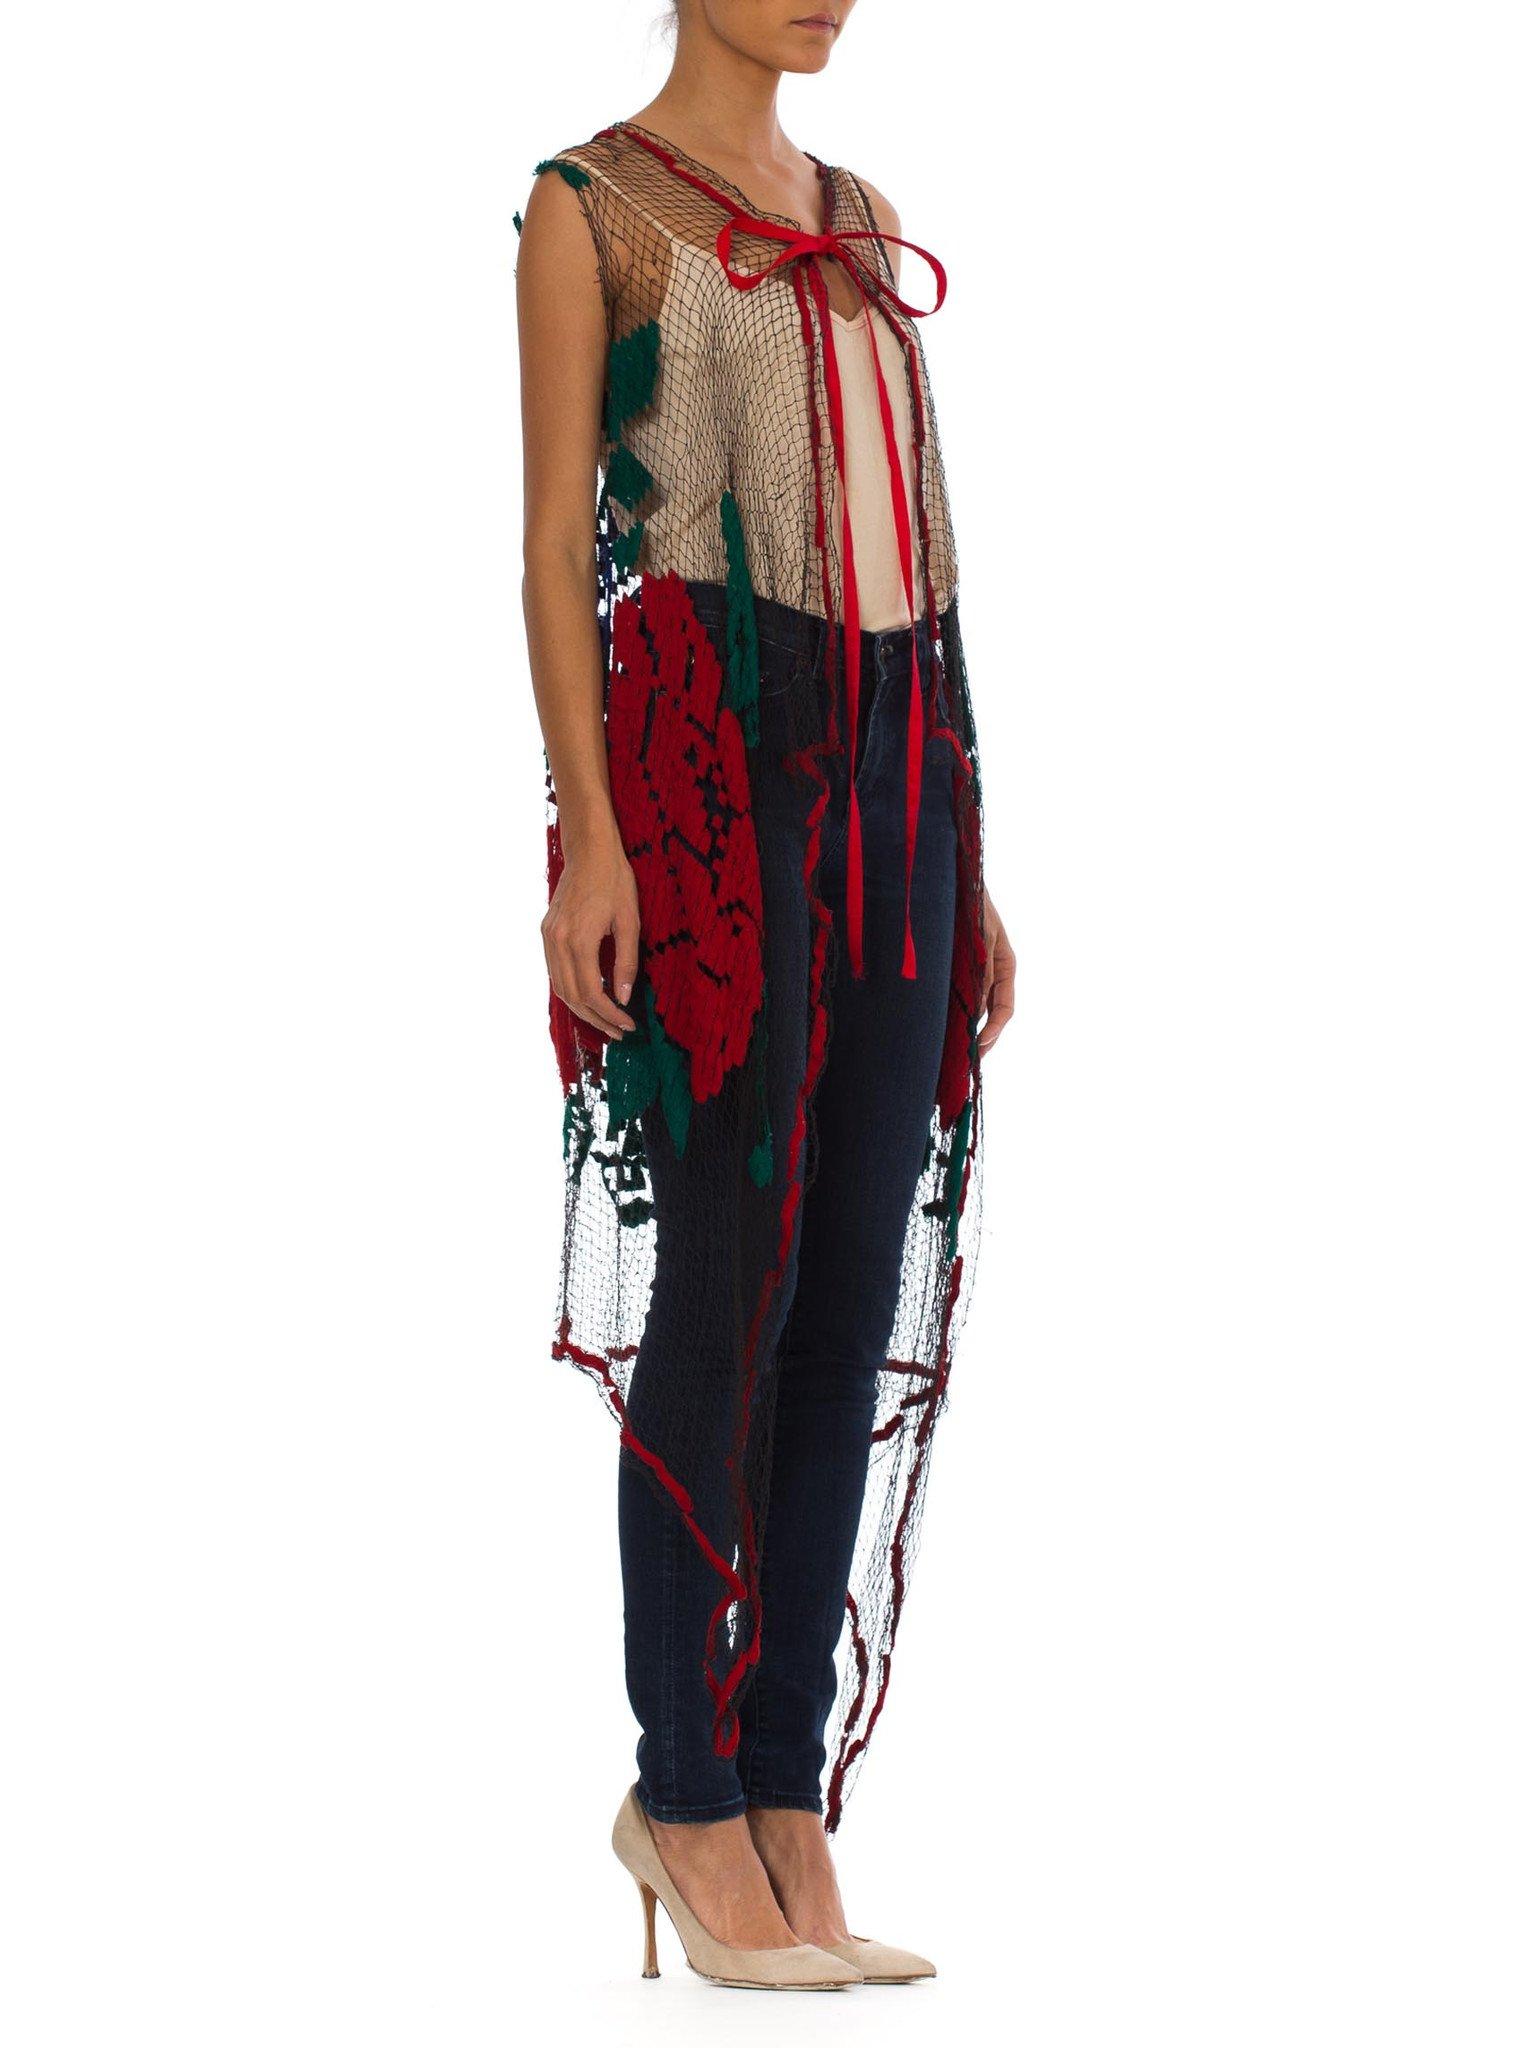 MORPHEW COLLECTION Multicolor Embroidered Net Lace Boho Vest In Excellent Condition In New York, NY